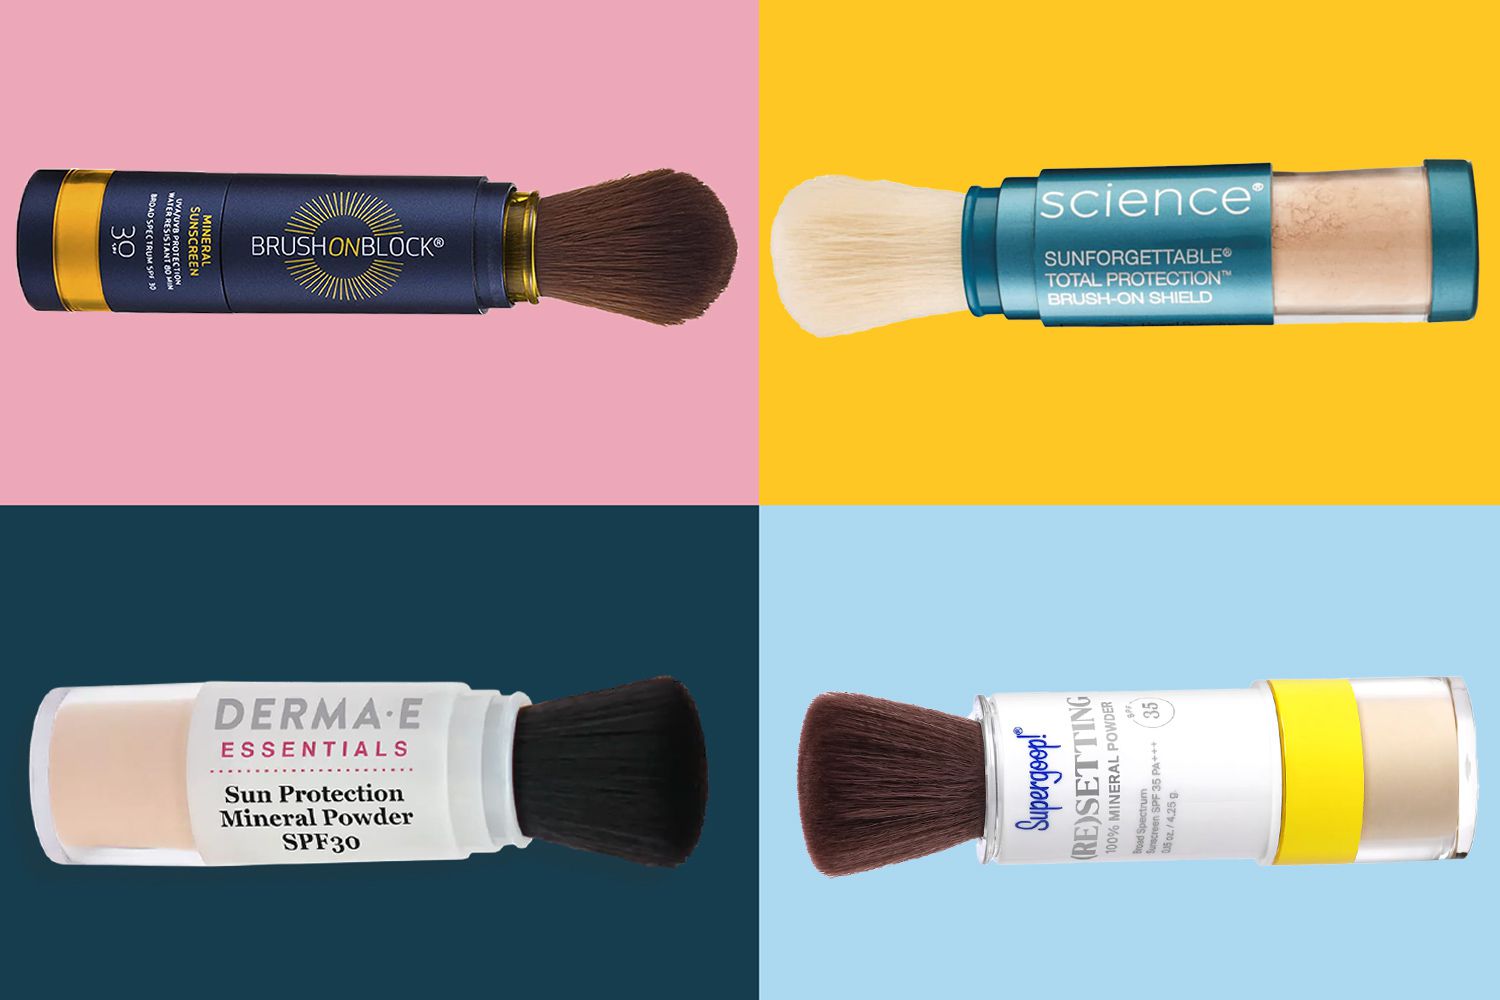 Dermatologists Share the 7 Best Powder Sunscreens of 2022